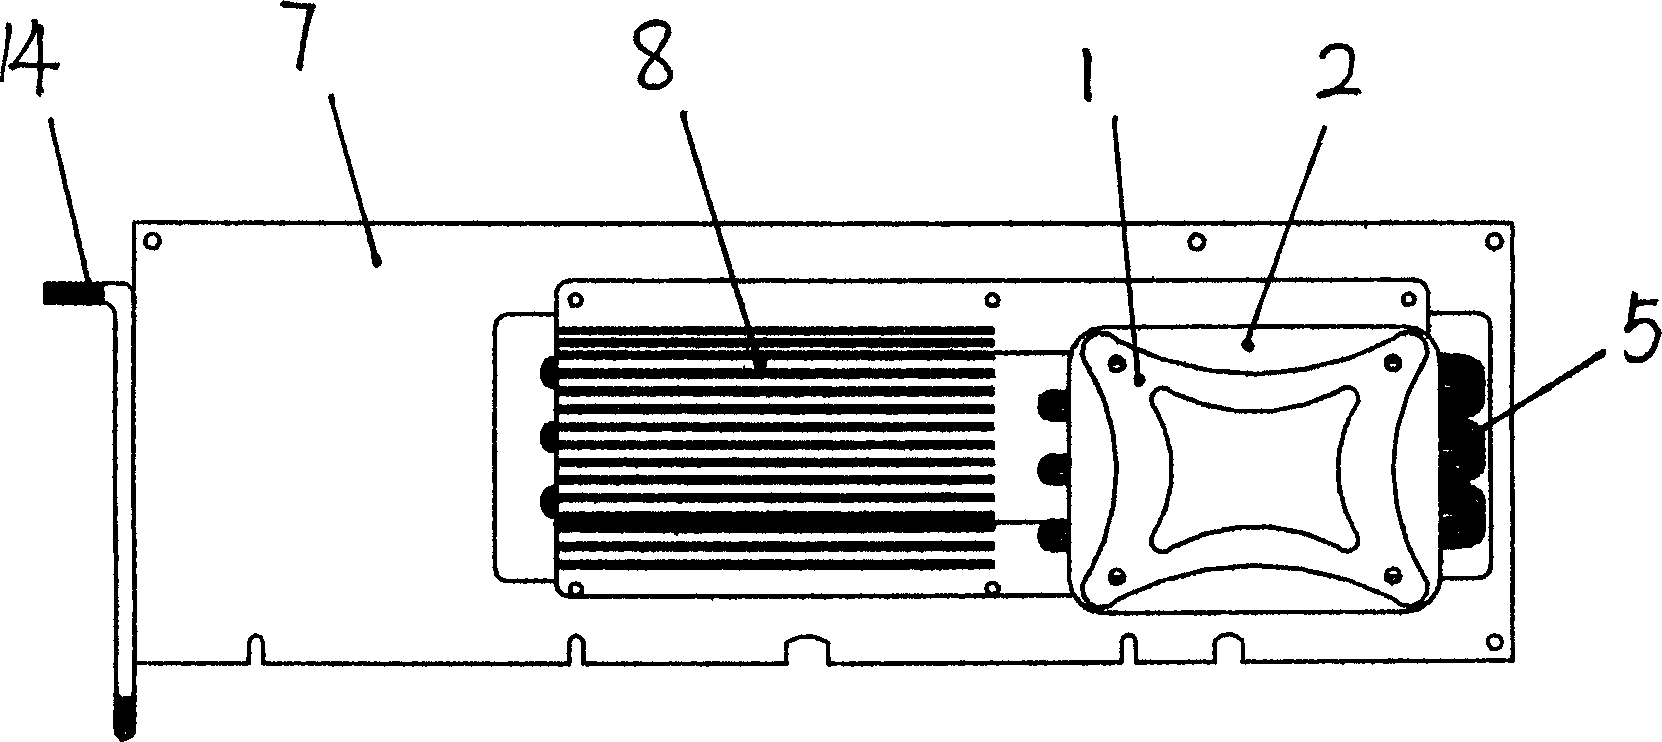 Non-fan cooling device for CPU of passive baseplate type engineering controlled computer